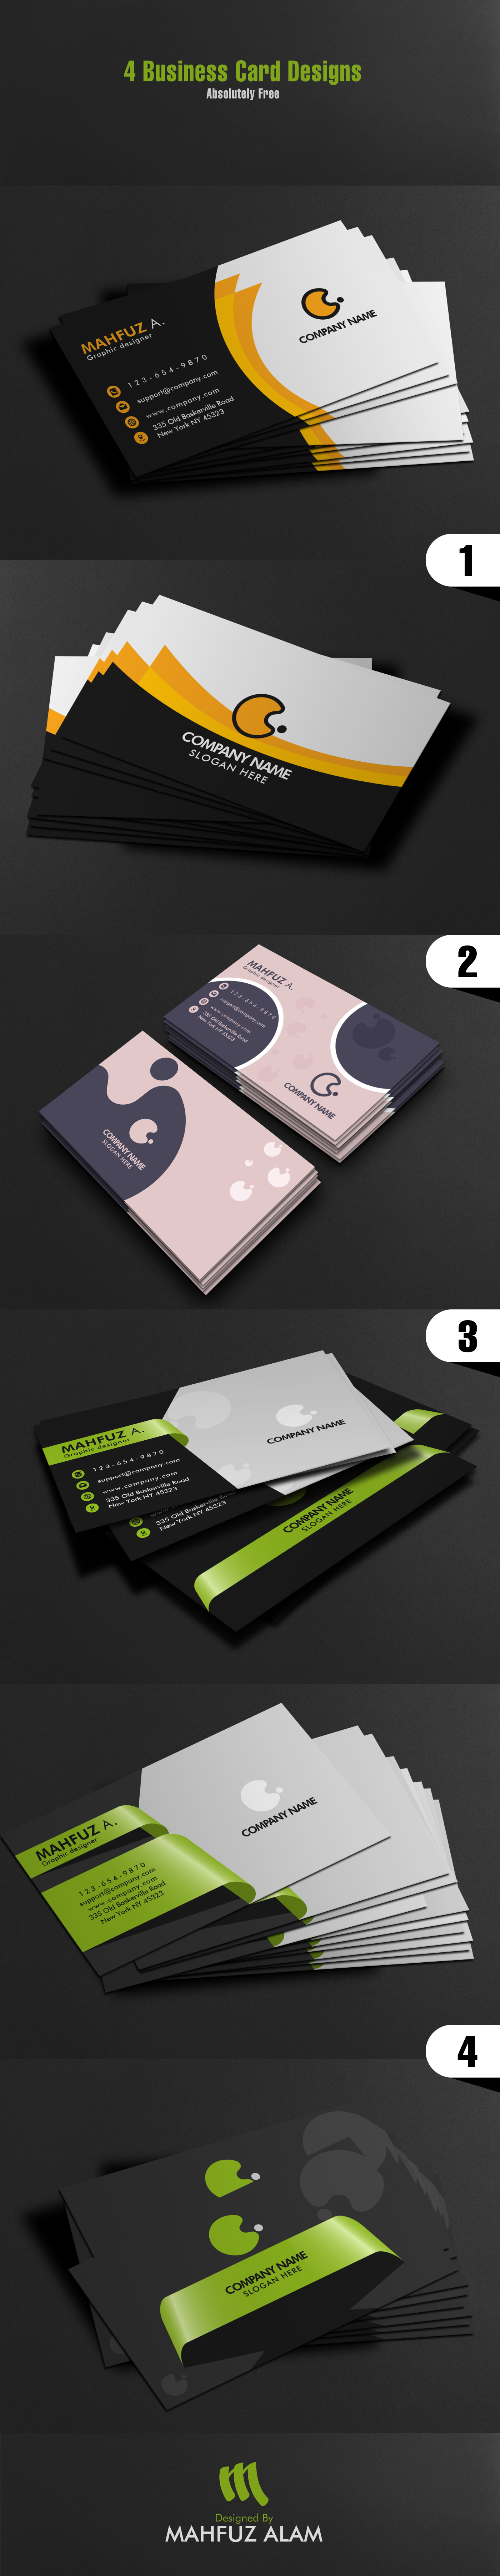 business card Mockup brand identity graphic design  psd file free design creative business card Modern Business Card Business card design Business card template